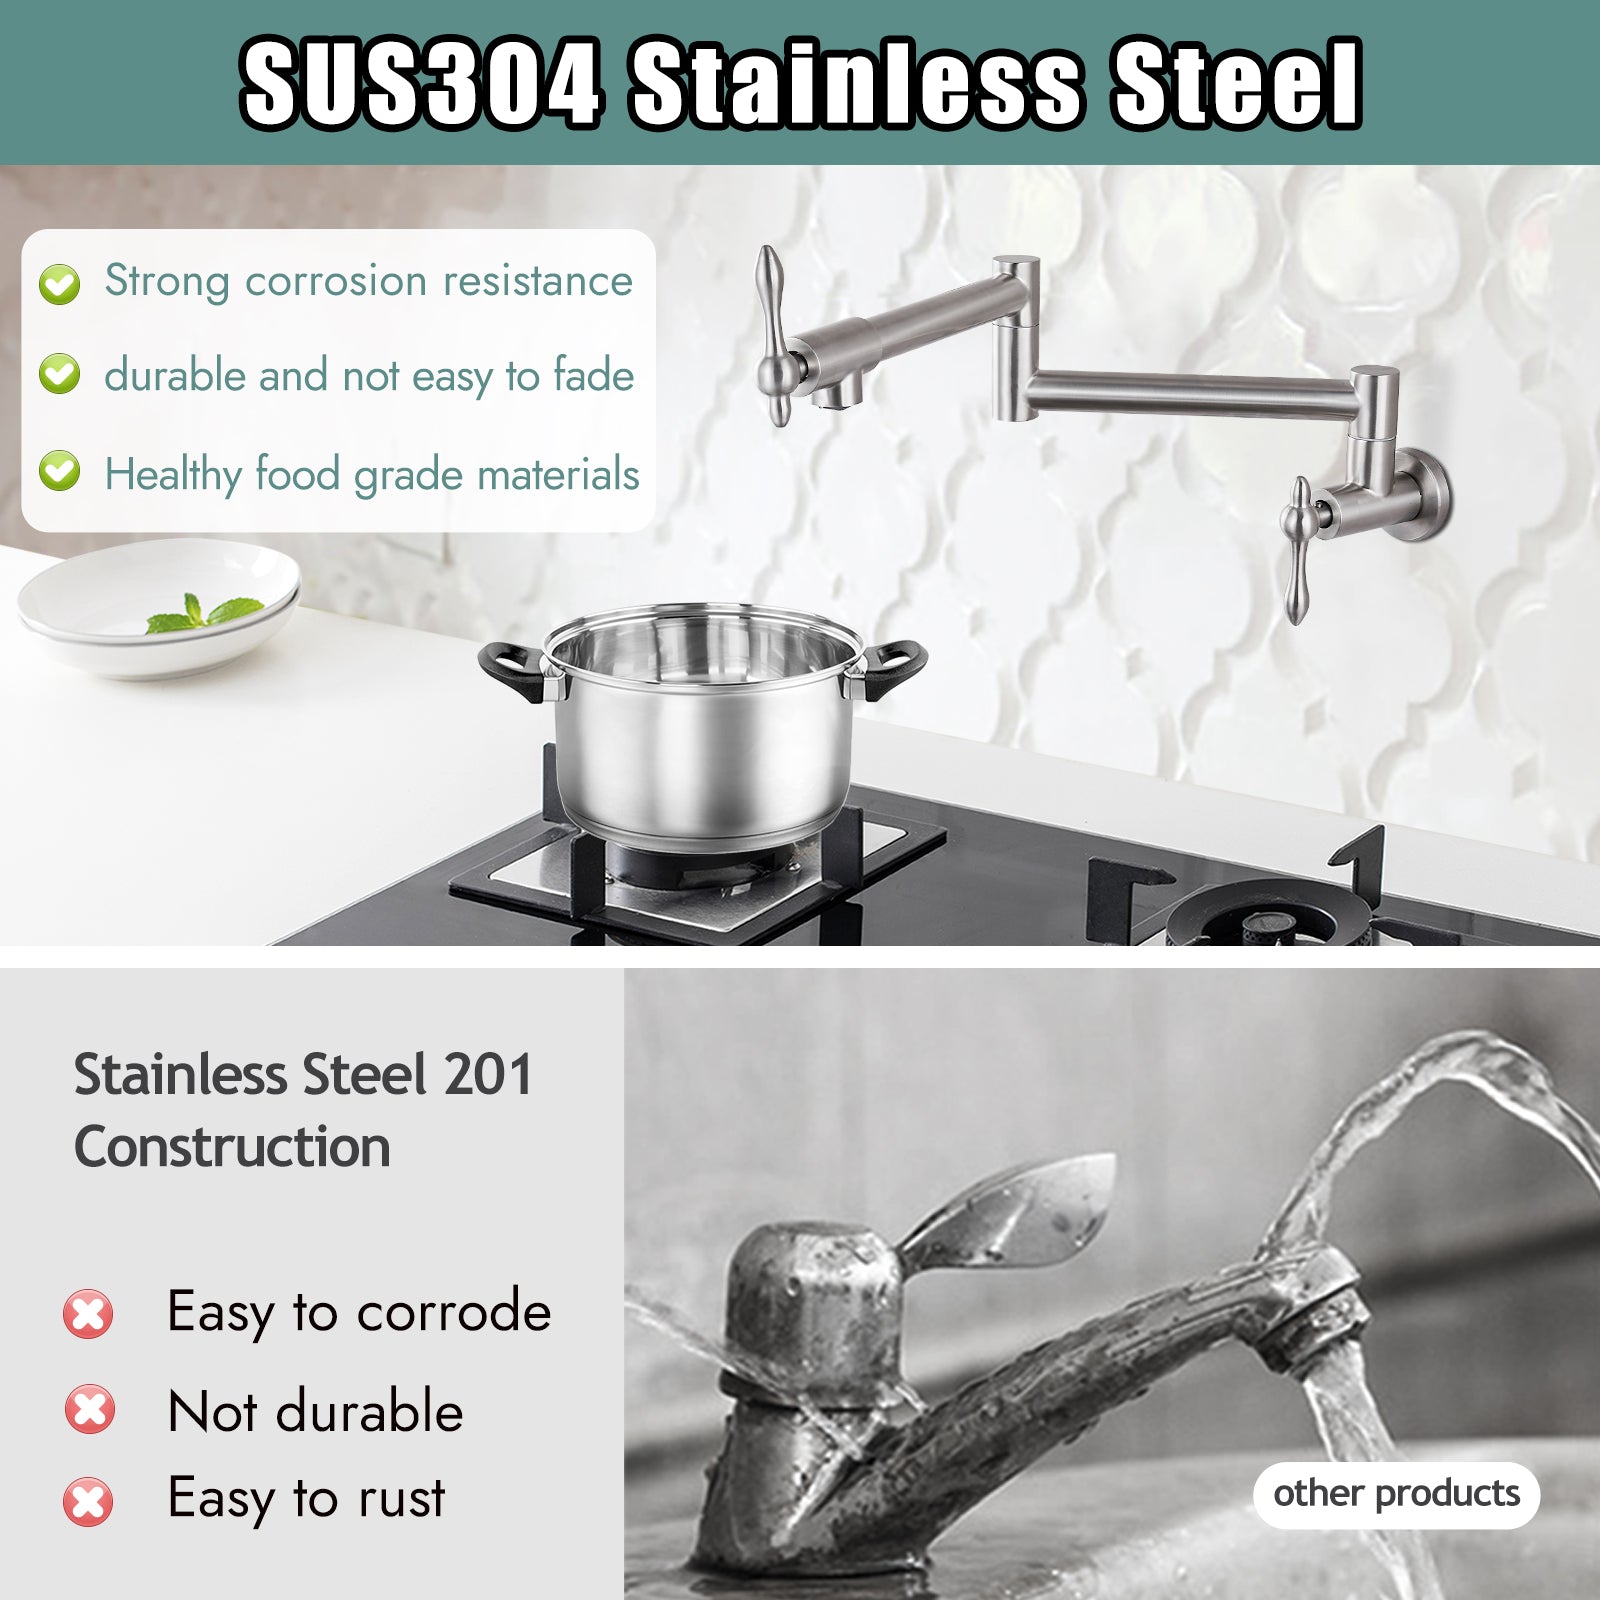 Heyalan Stainless Steel SUS304 19" Pot Filler Faucet Double Joint Spout Stretchable Swing Arm with Single Hole Two Handles Wall Mounted Commercial Kitchen Sink Faucet